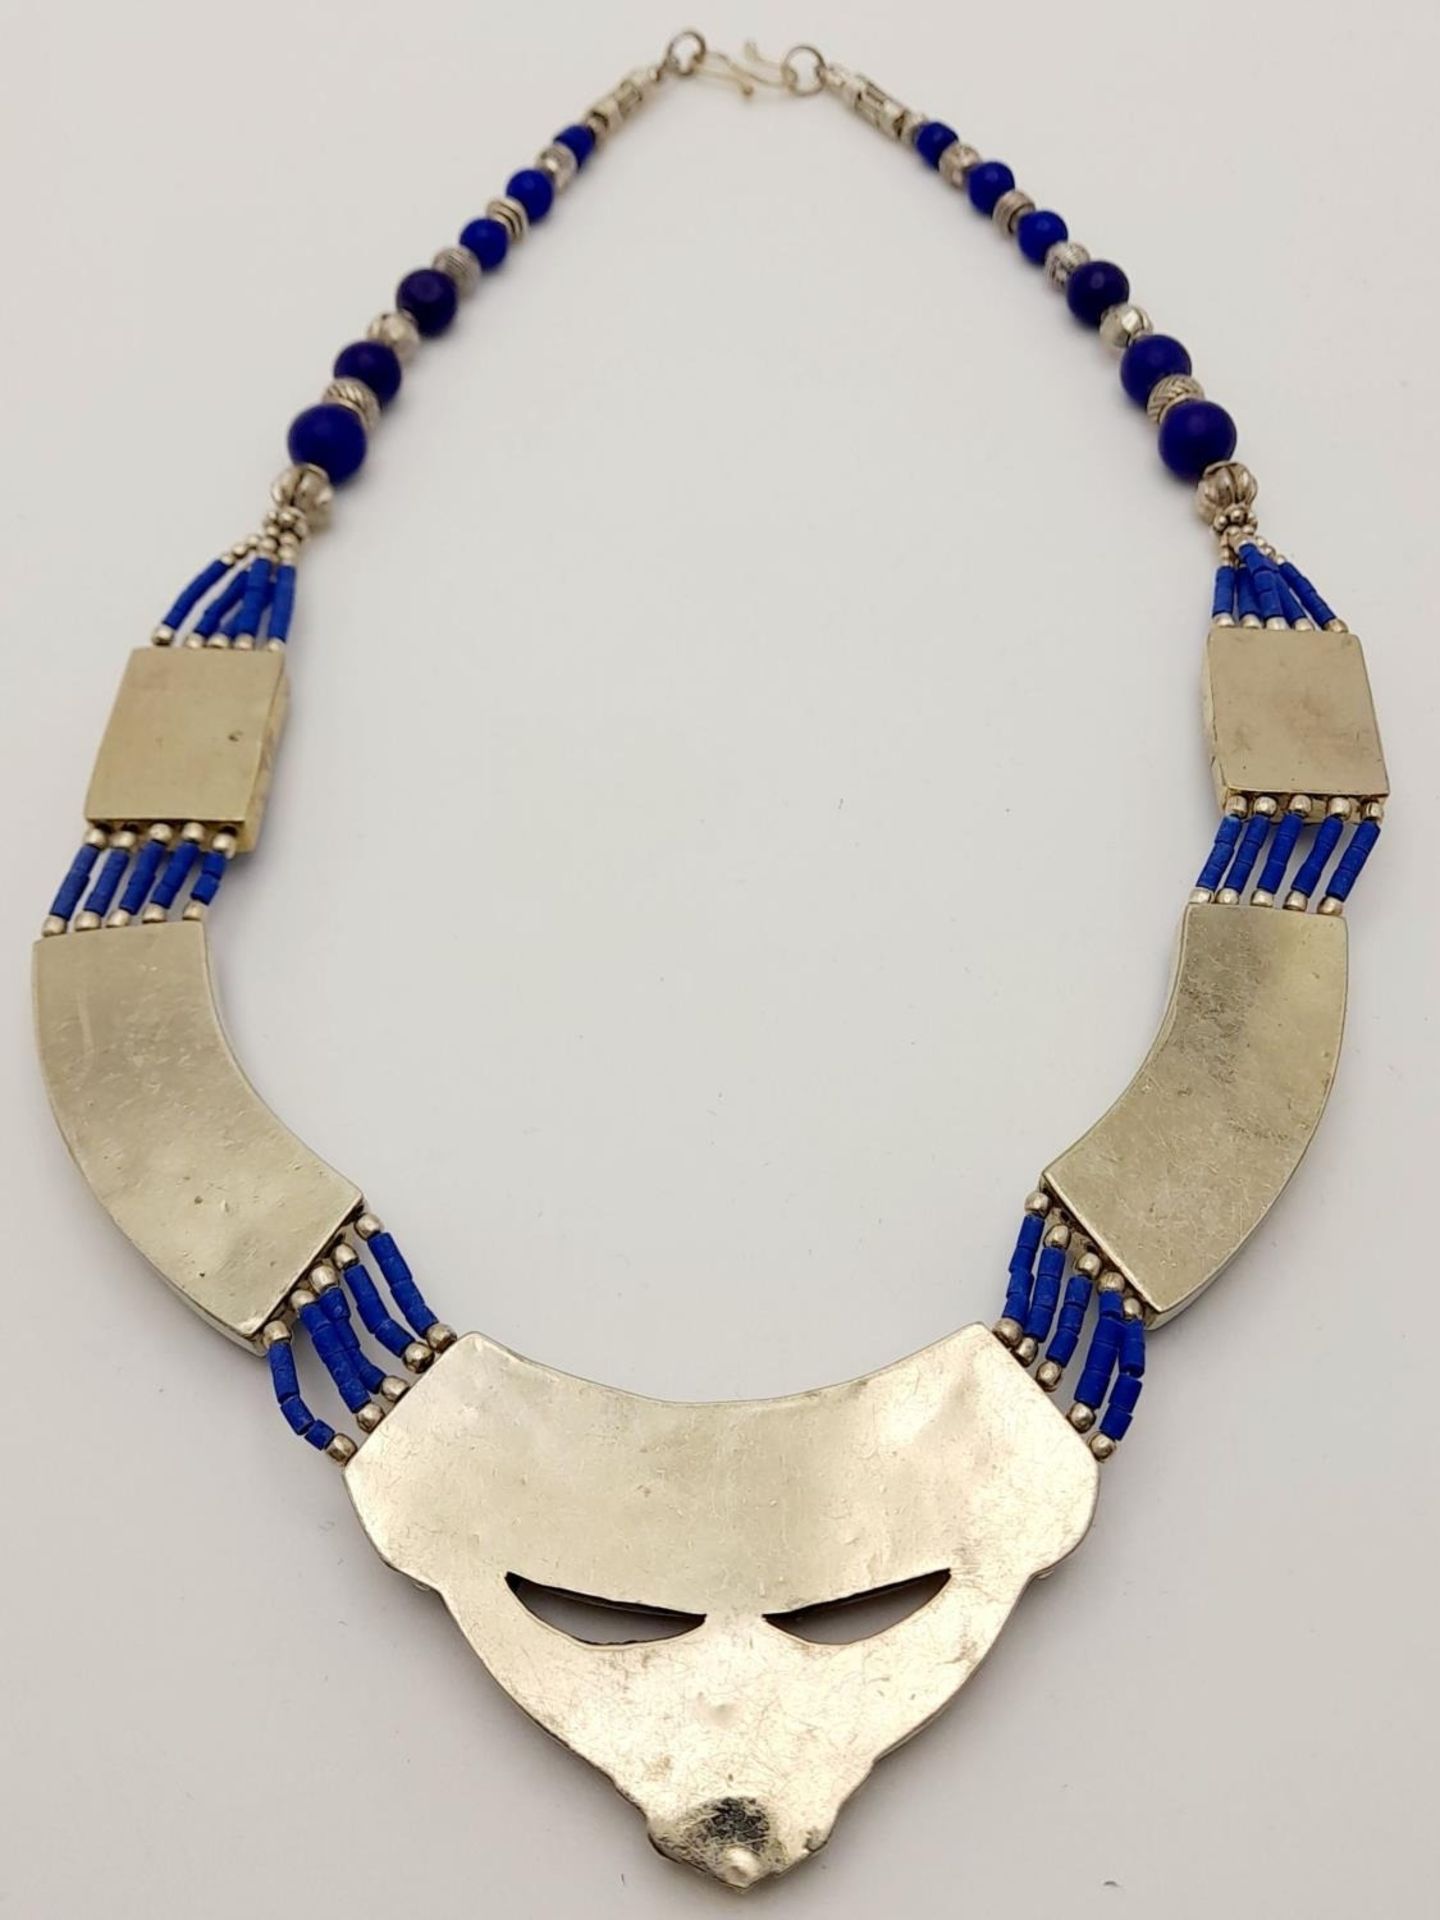 A tribal, wonderfully crafted, white metal and lapis lazuli necklace and bracelet set in a - Image 4 of 6